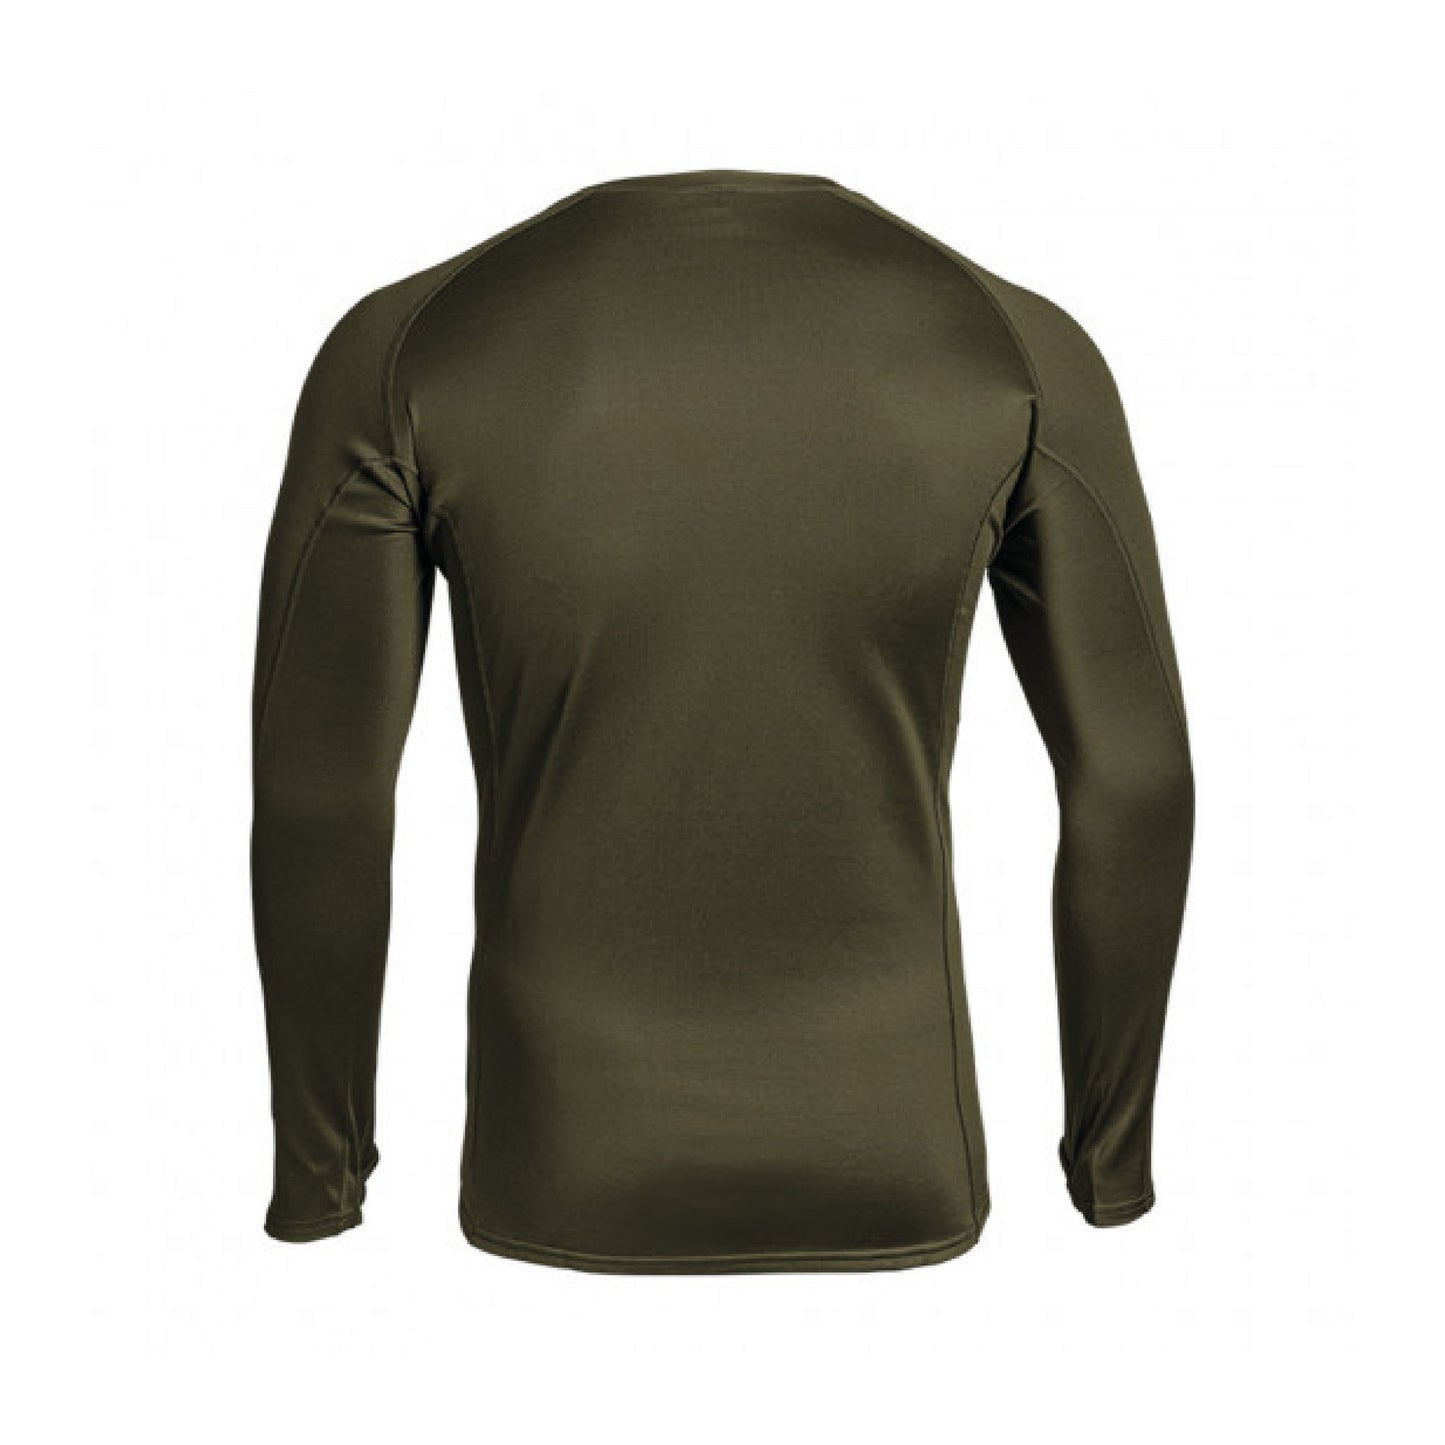 A10 Thermo Performer longsleeve oliv